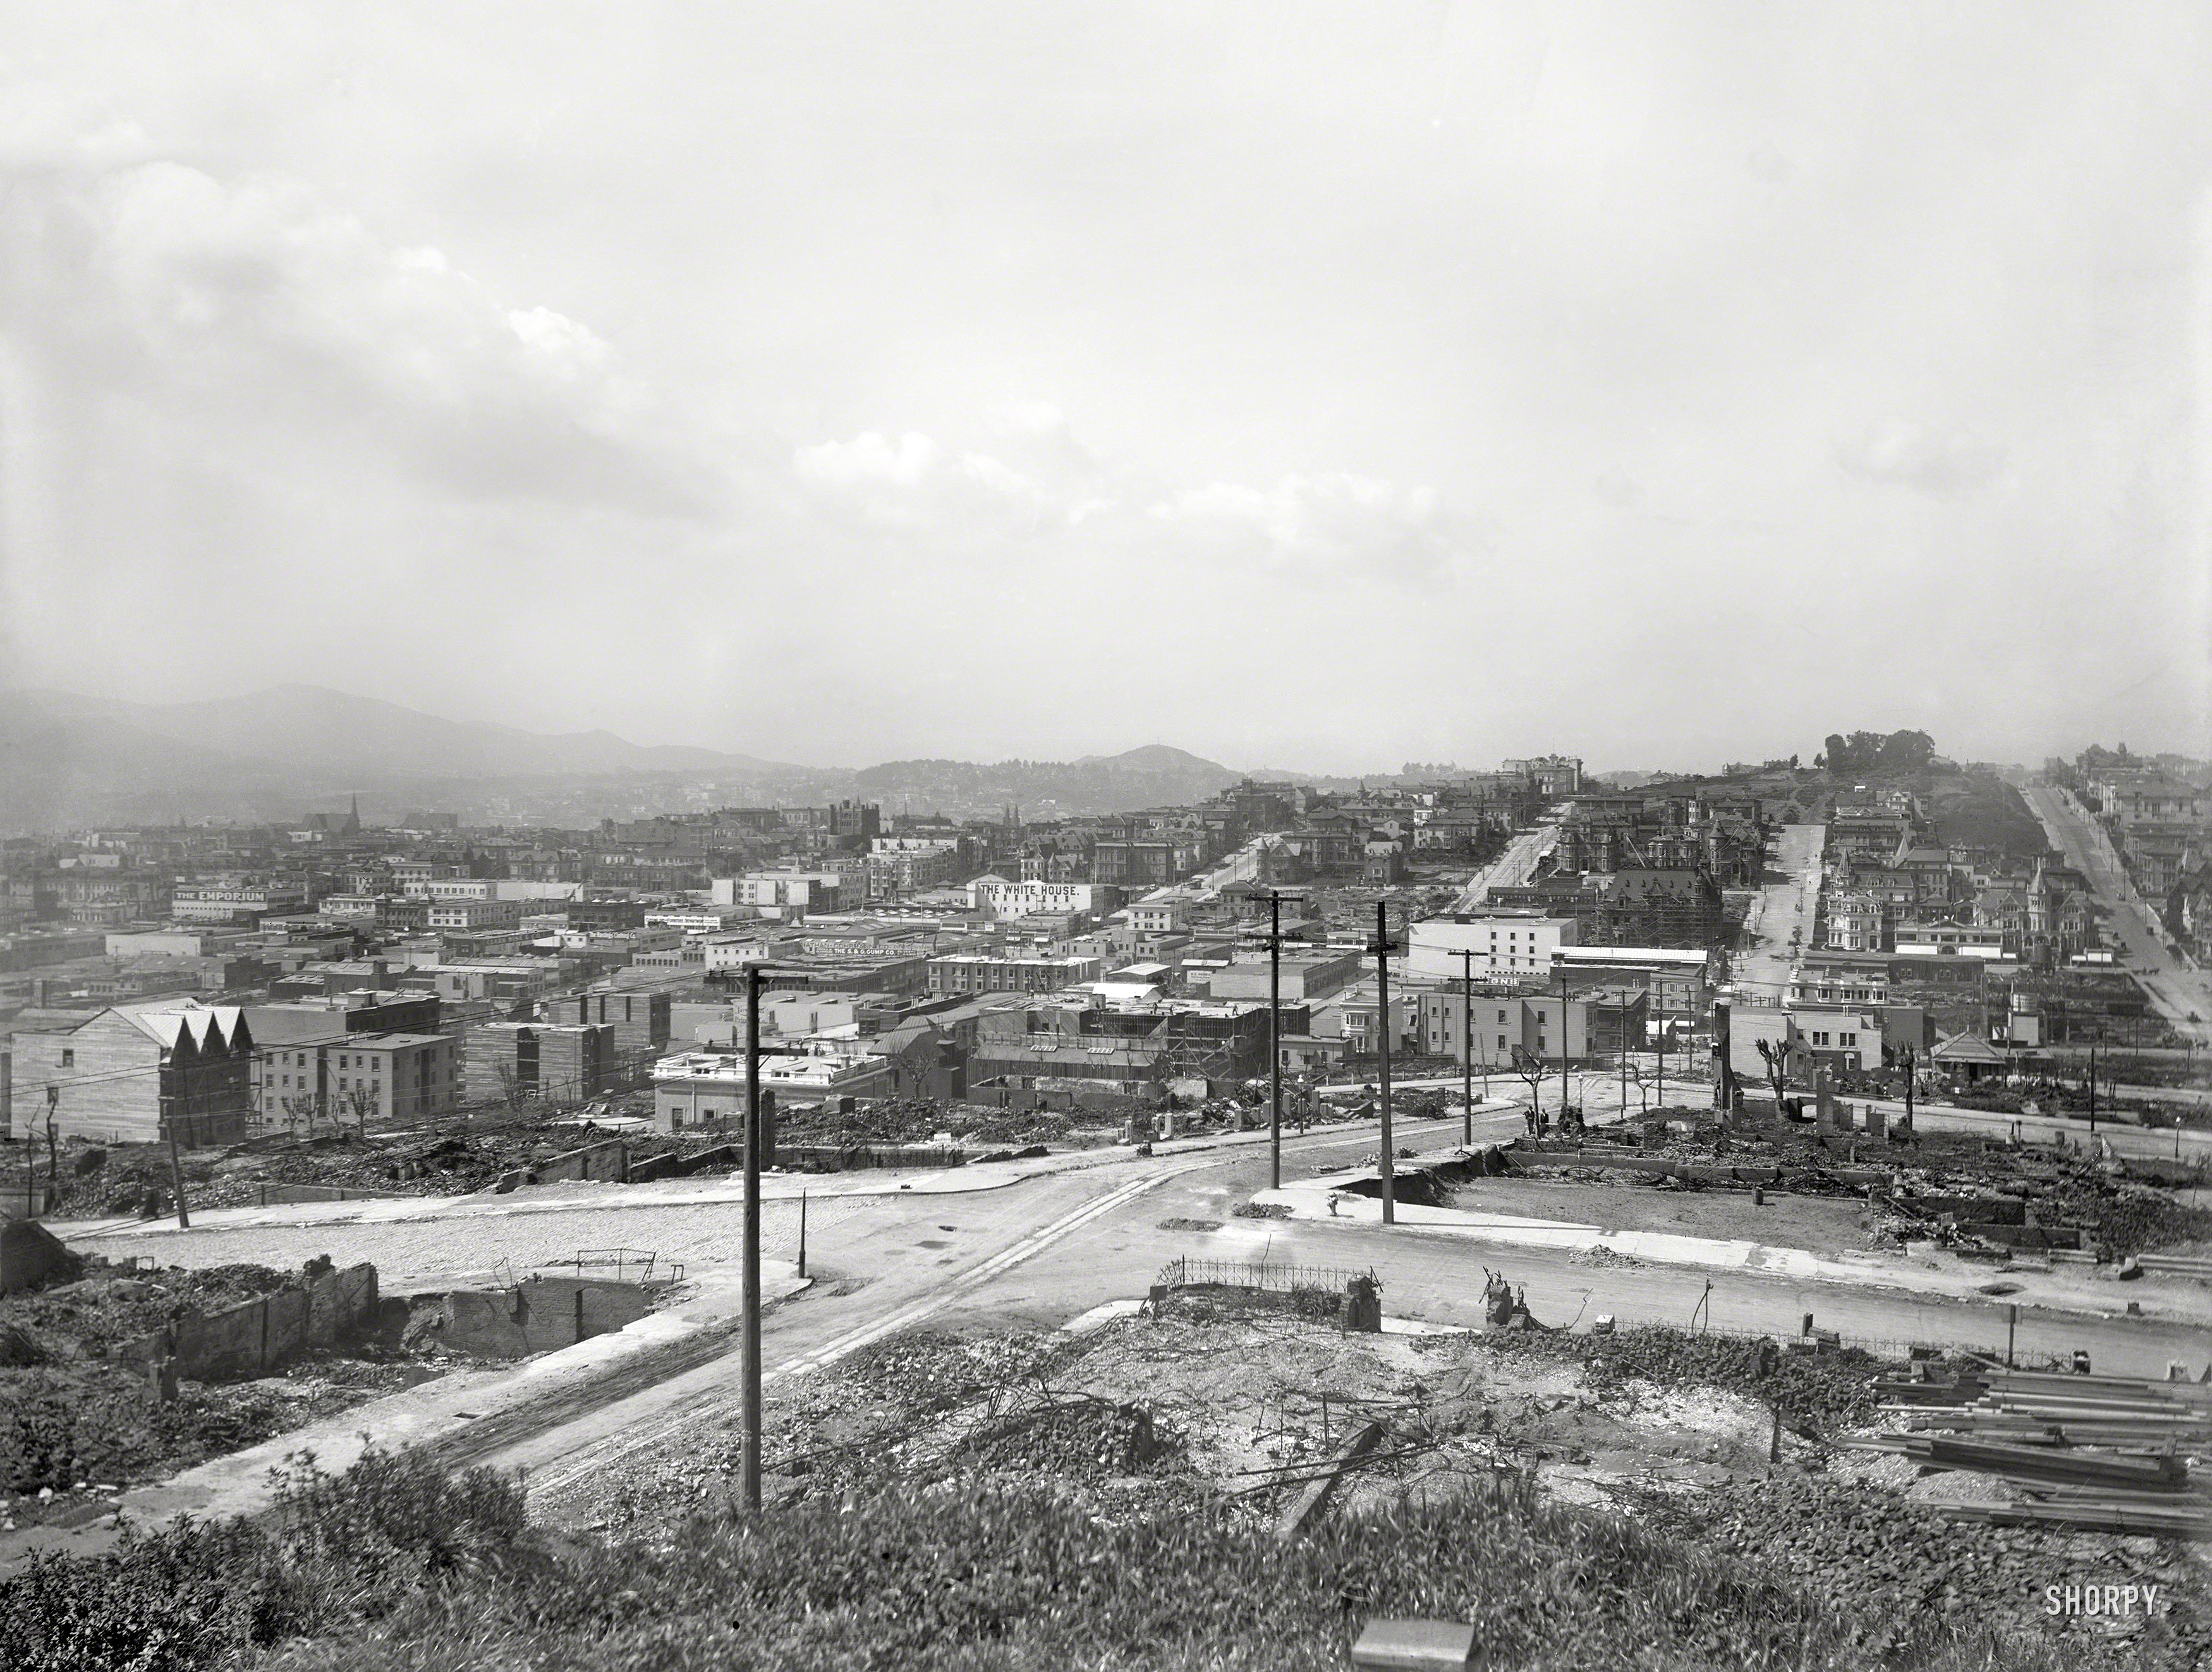 San Francisco rebuilds after the devastating earthquake and fire of April 18, 1906. 8½x6½ inch glass negative from Wyland Stanley Collection of San Francisco historical memorabilia later acquired by Marilyn Blaisdell. View full size.